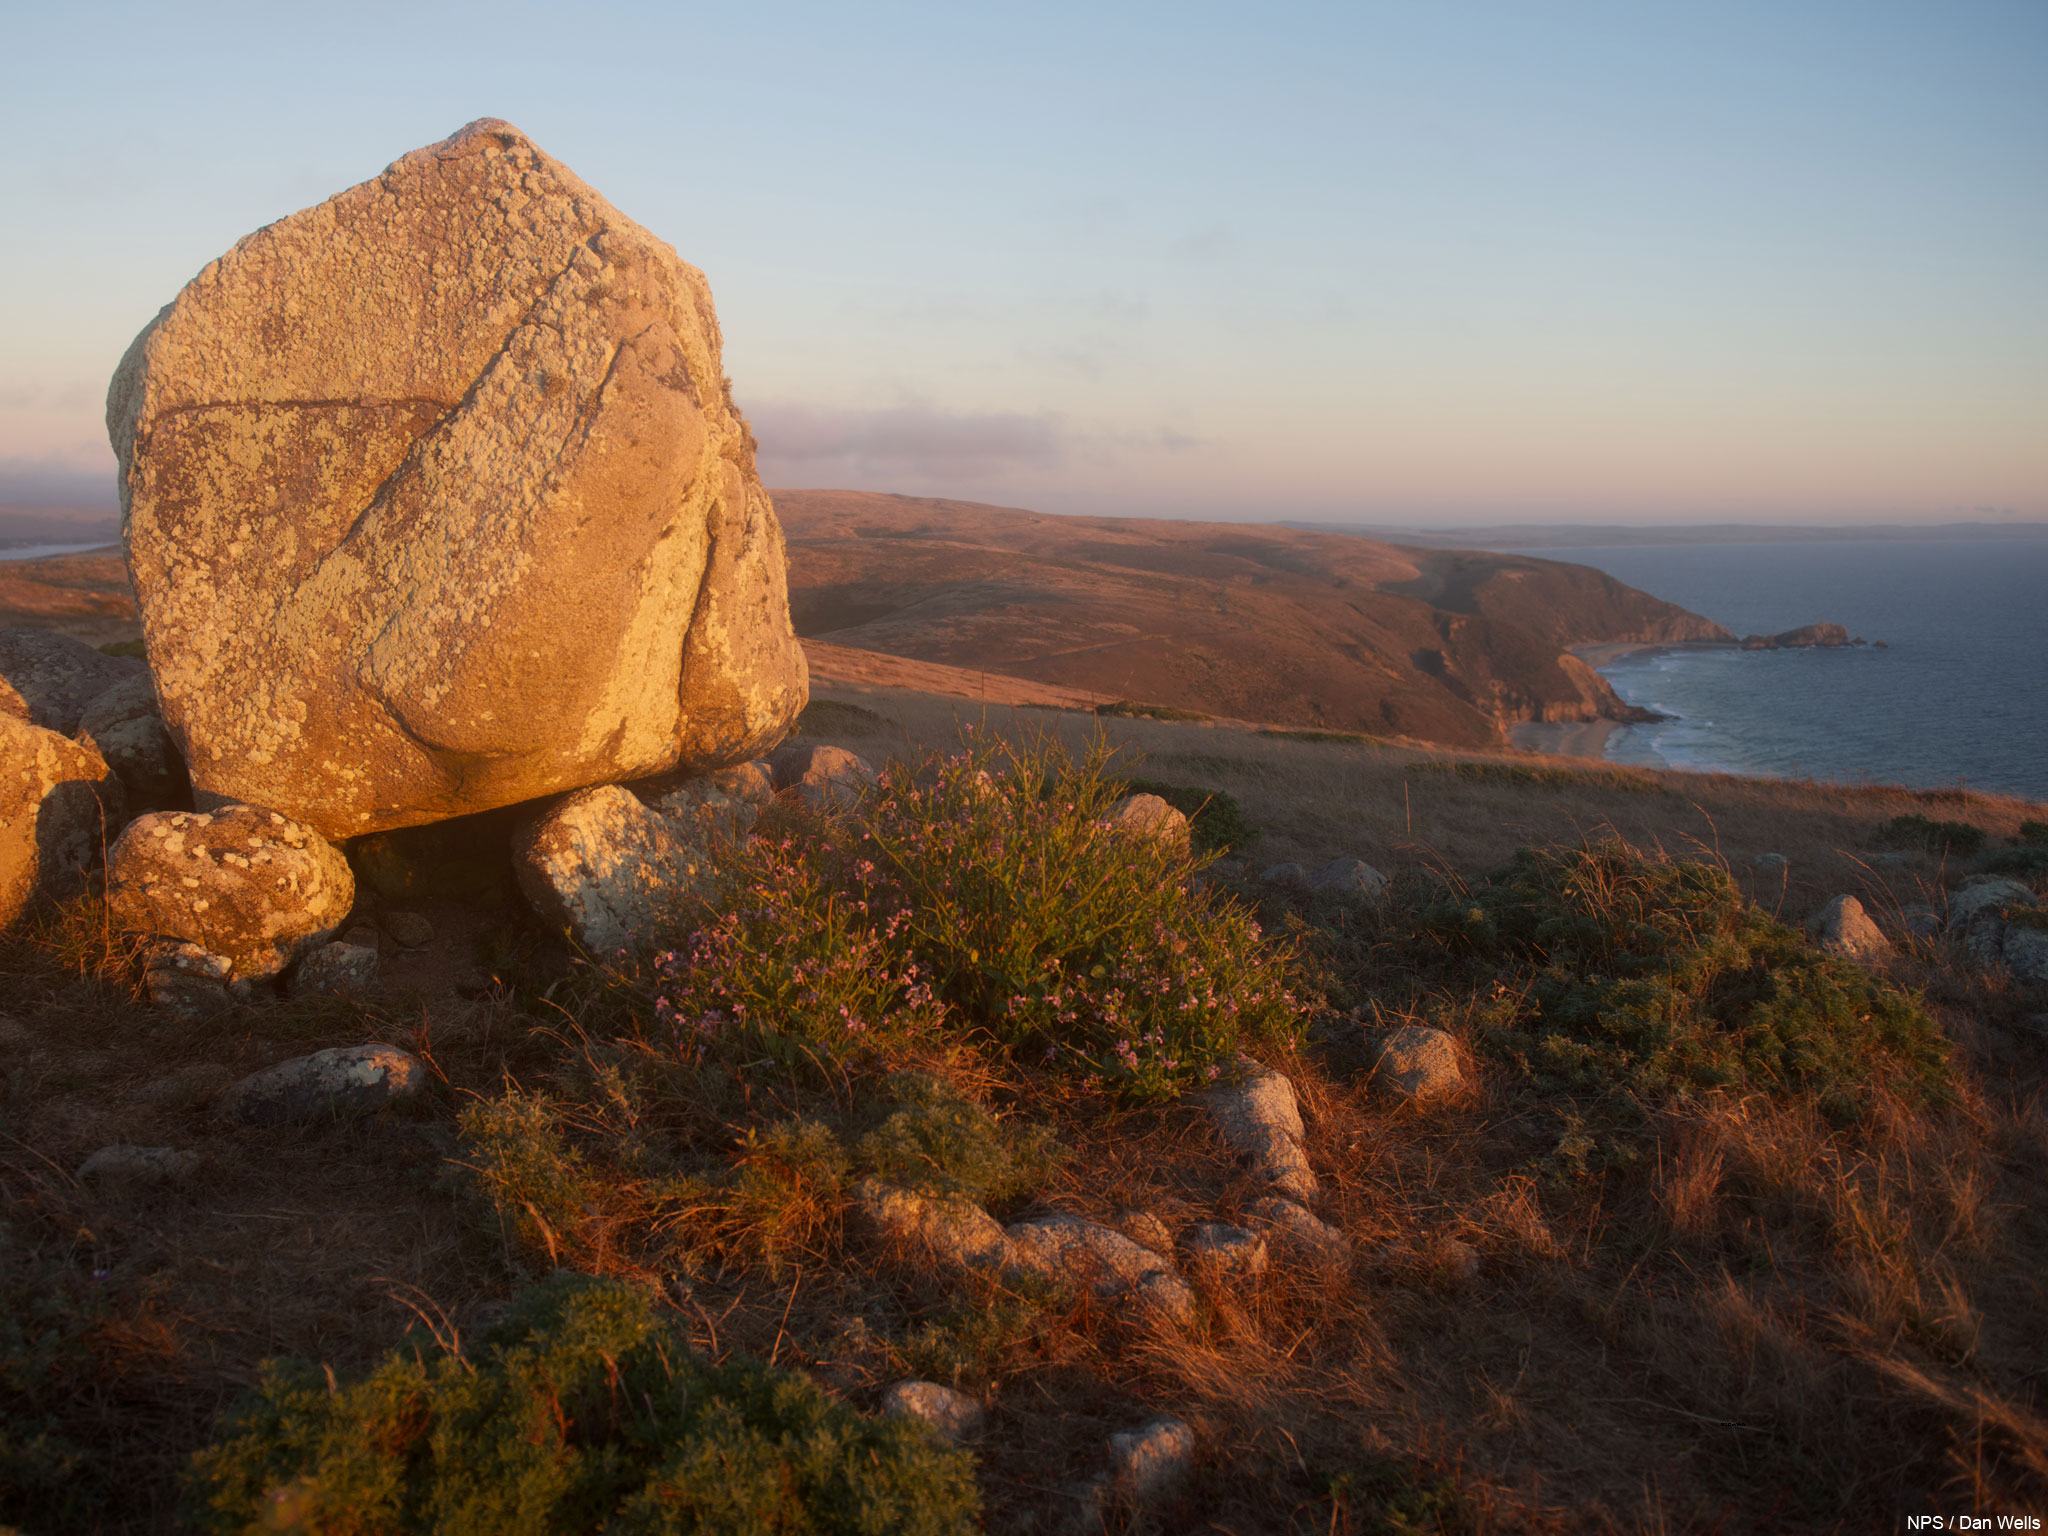 Photo taken at sunset looking south from Tomales Point with a large granite boulder on the left.